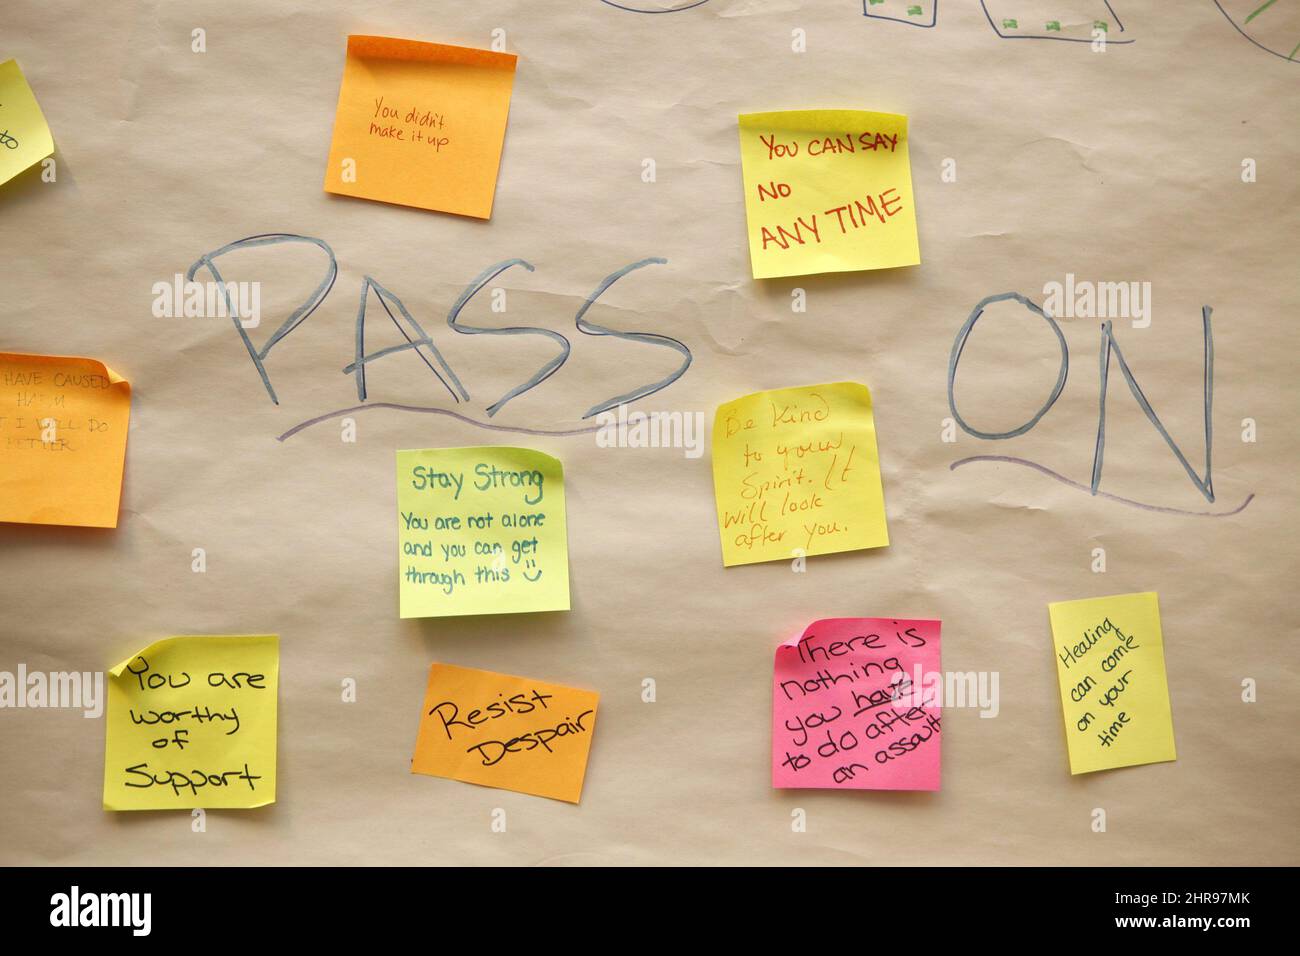 A sign created by students in September 2015 as part of the anti-violence project, following an assault on campus contains messages of support and knowledge at UVic in Victoria, B.C., Friday, March 4, 2016. THE CANADIAN PRESS/Chad Hipolito Stock Photo